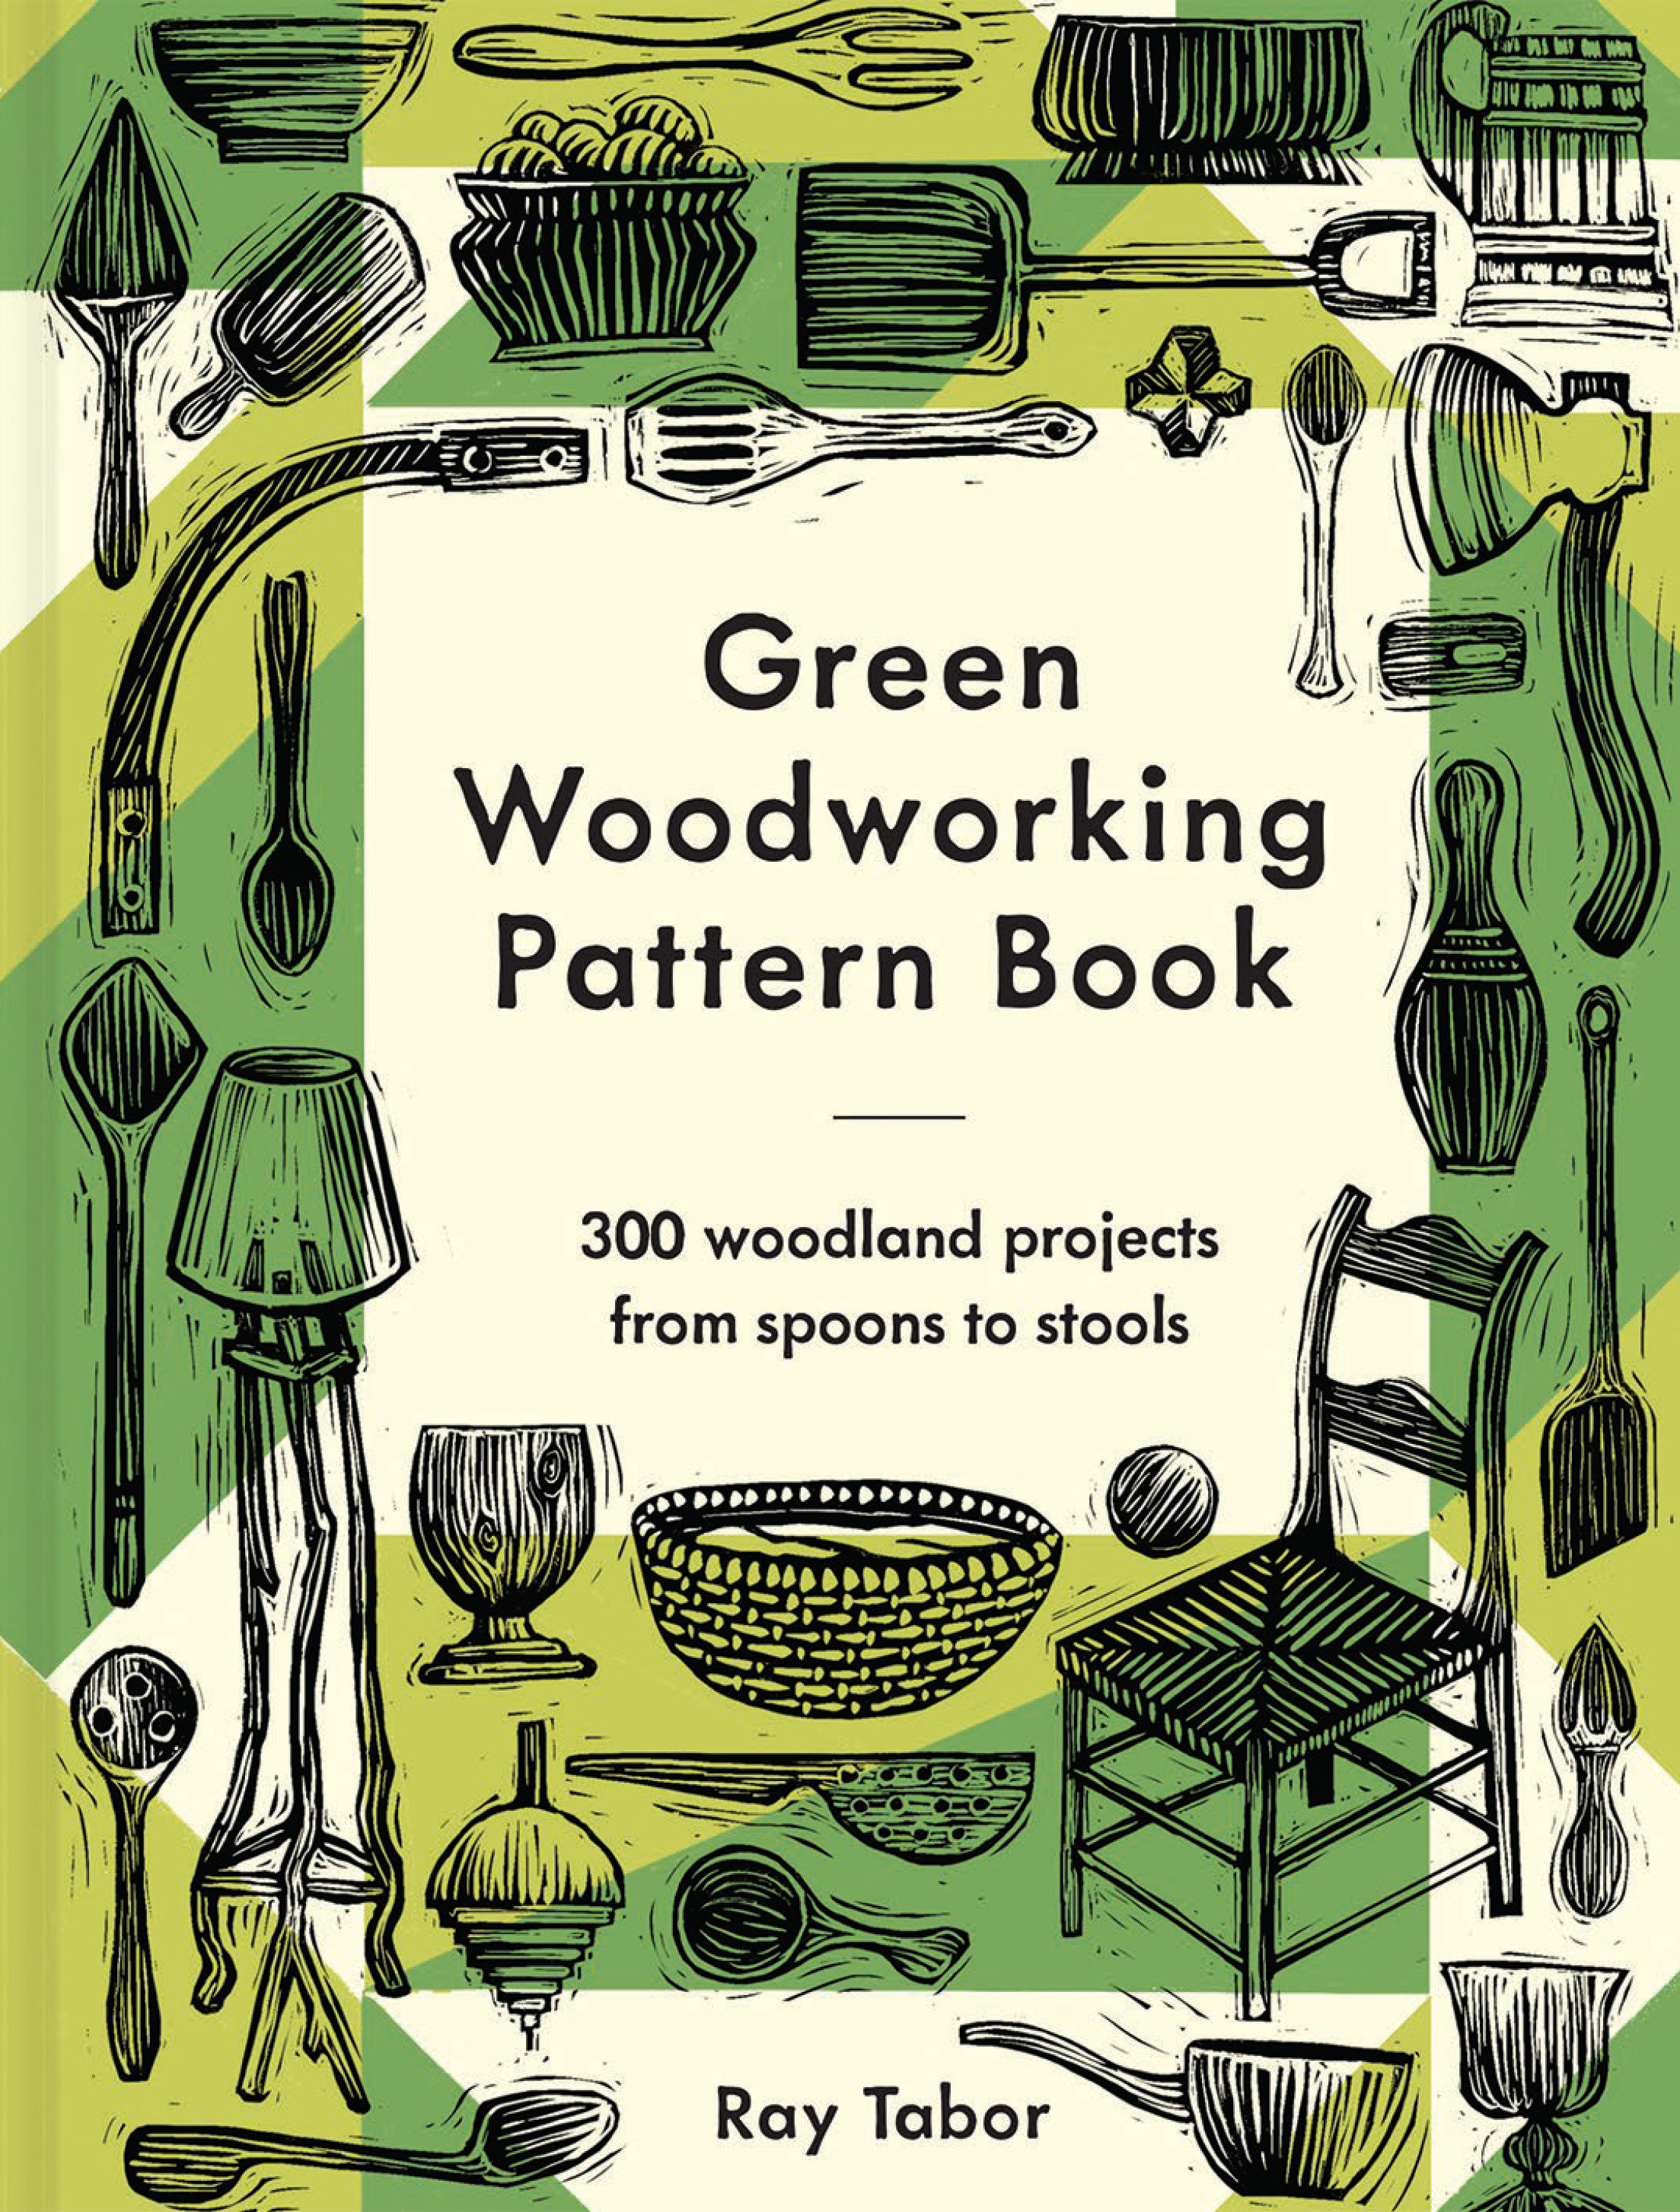 Green Woodworking Pattern Book (Hardcover Book)